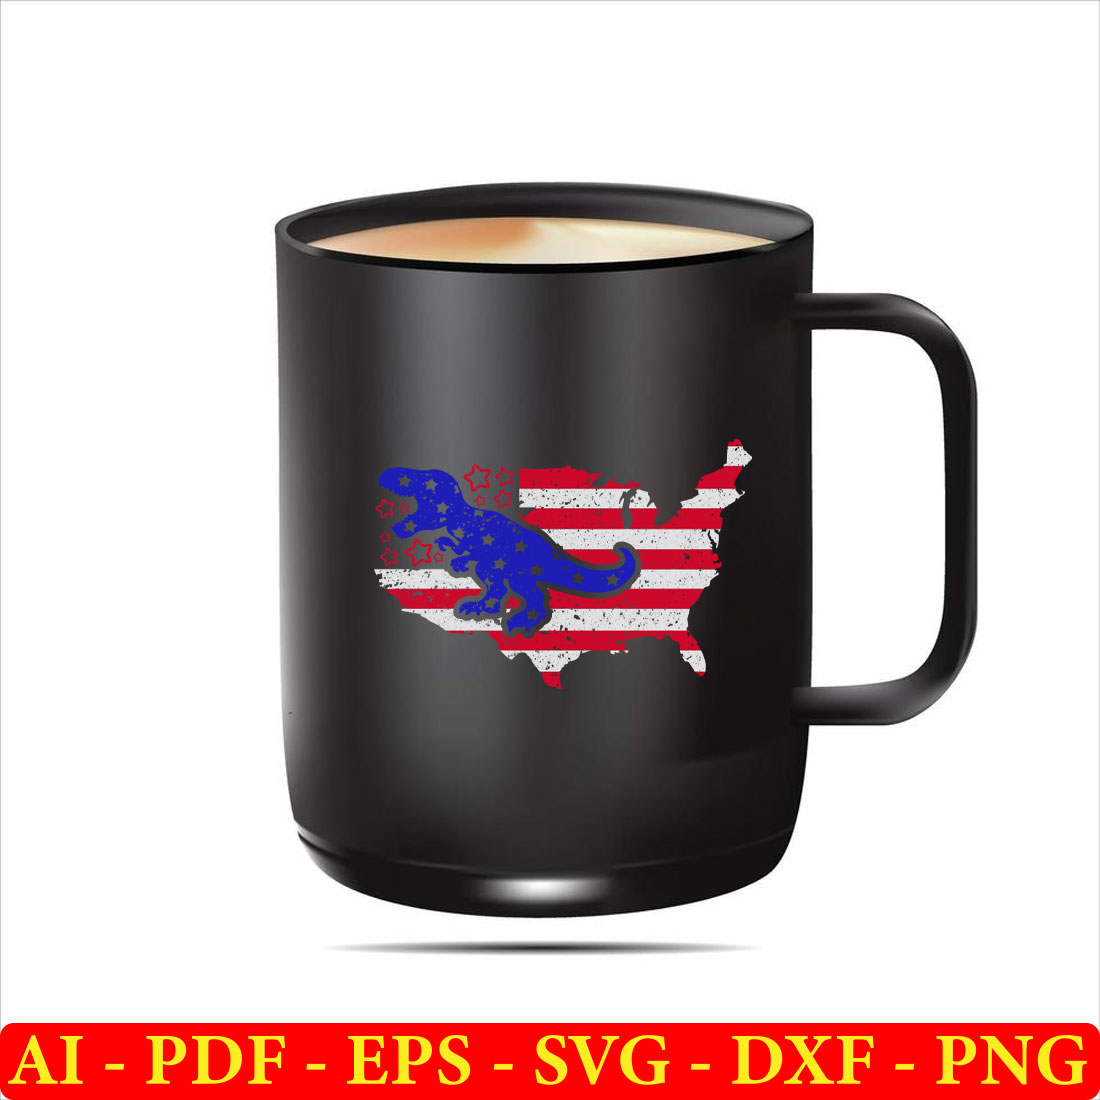 Black coffee mug with the american flag and a blue dog on it.